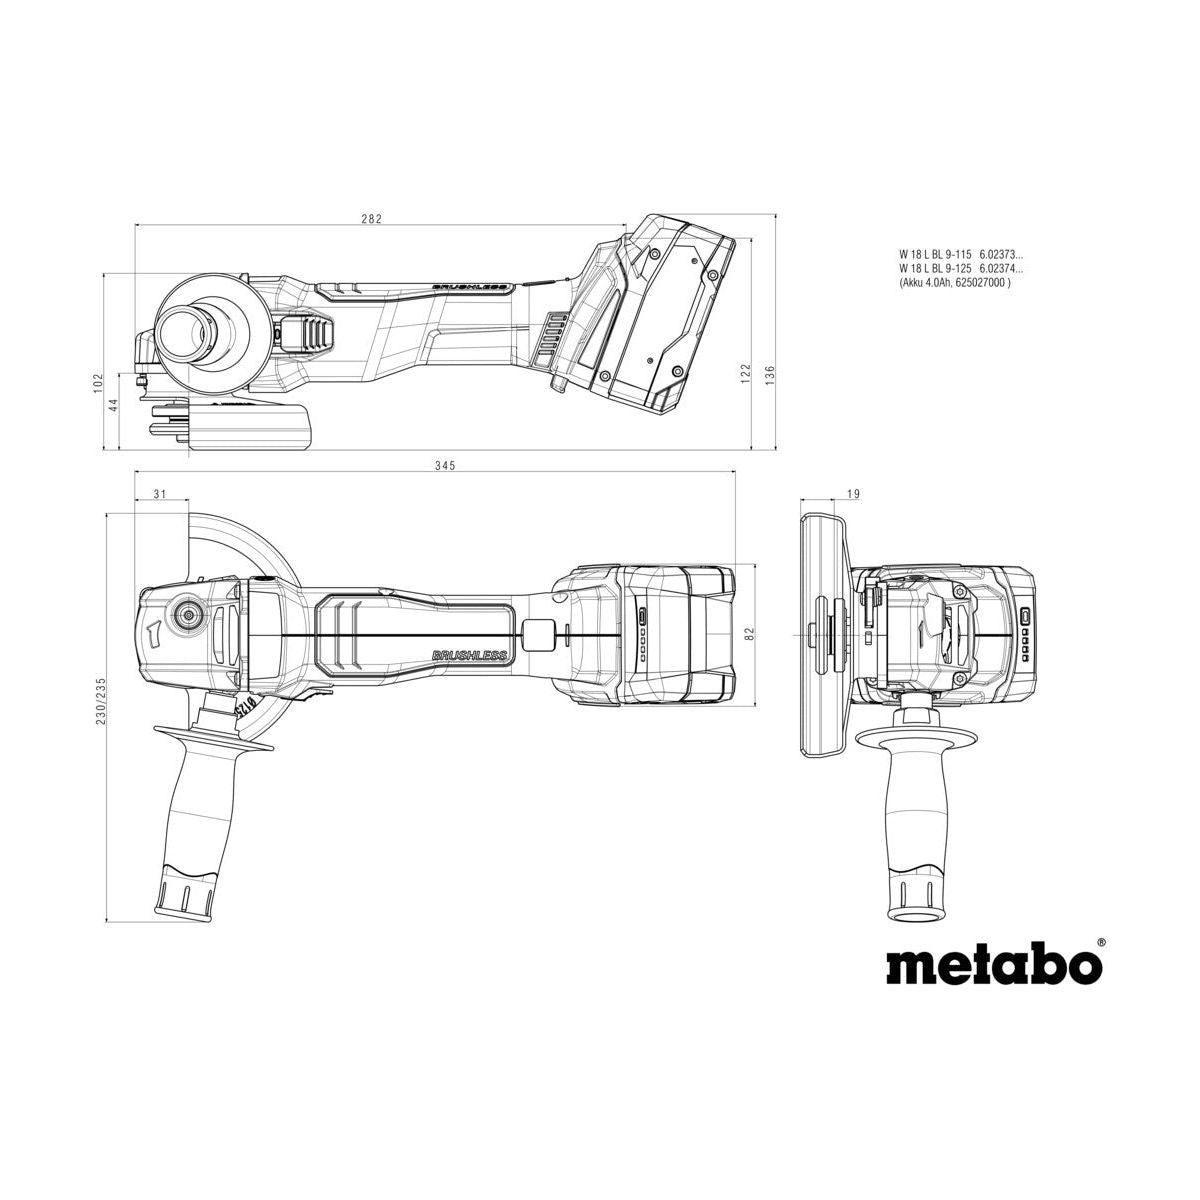 Metabo Cordless Angle Grinder Brushless 125mm W 18 L BL 9-125 18V Body Only in MetaBOX Case